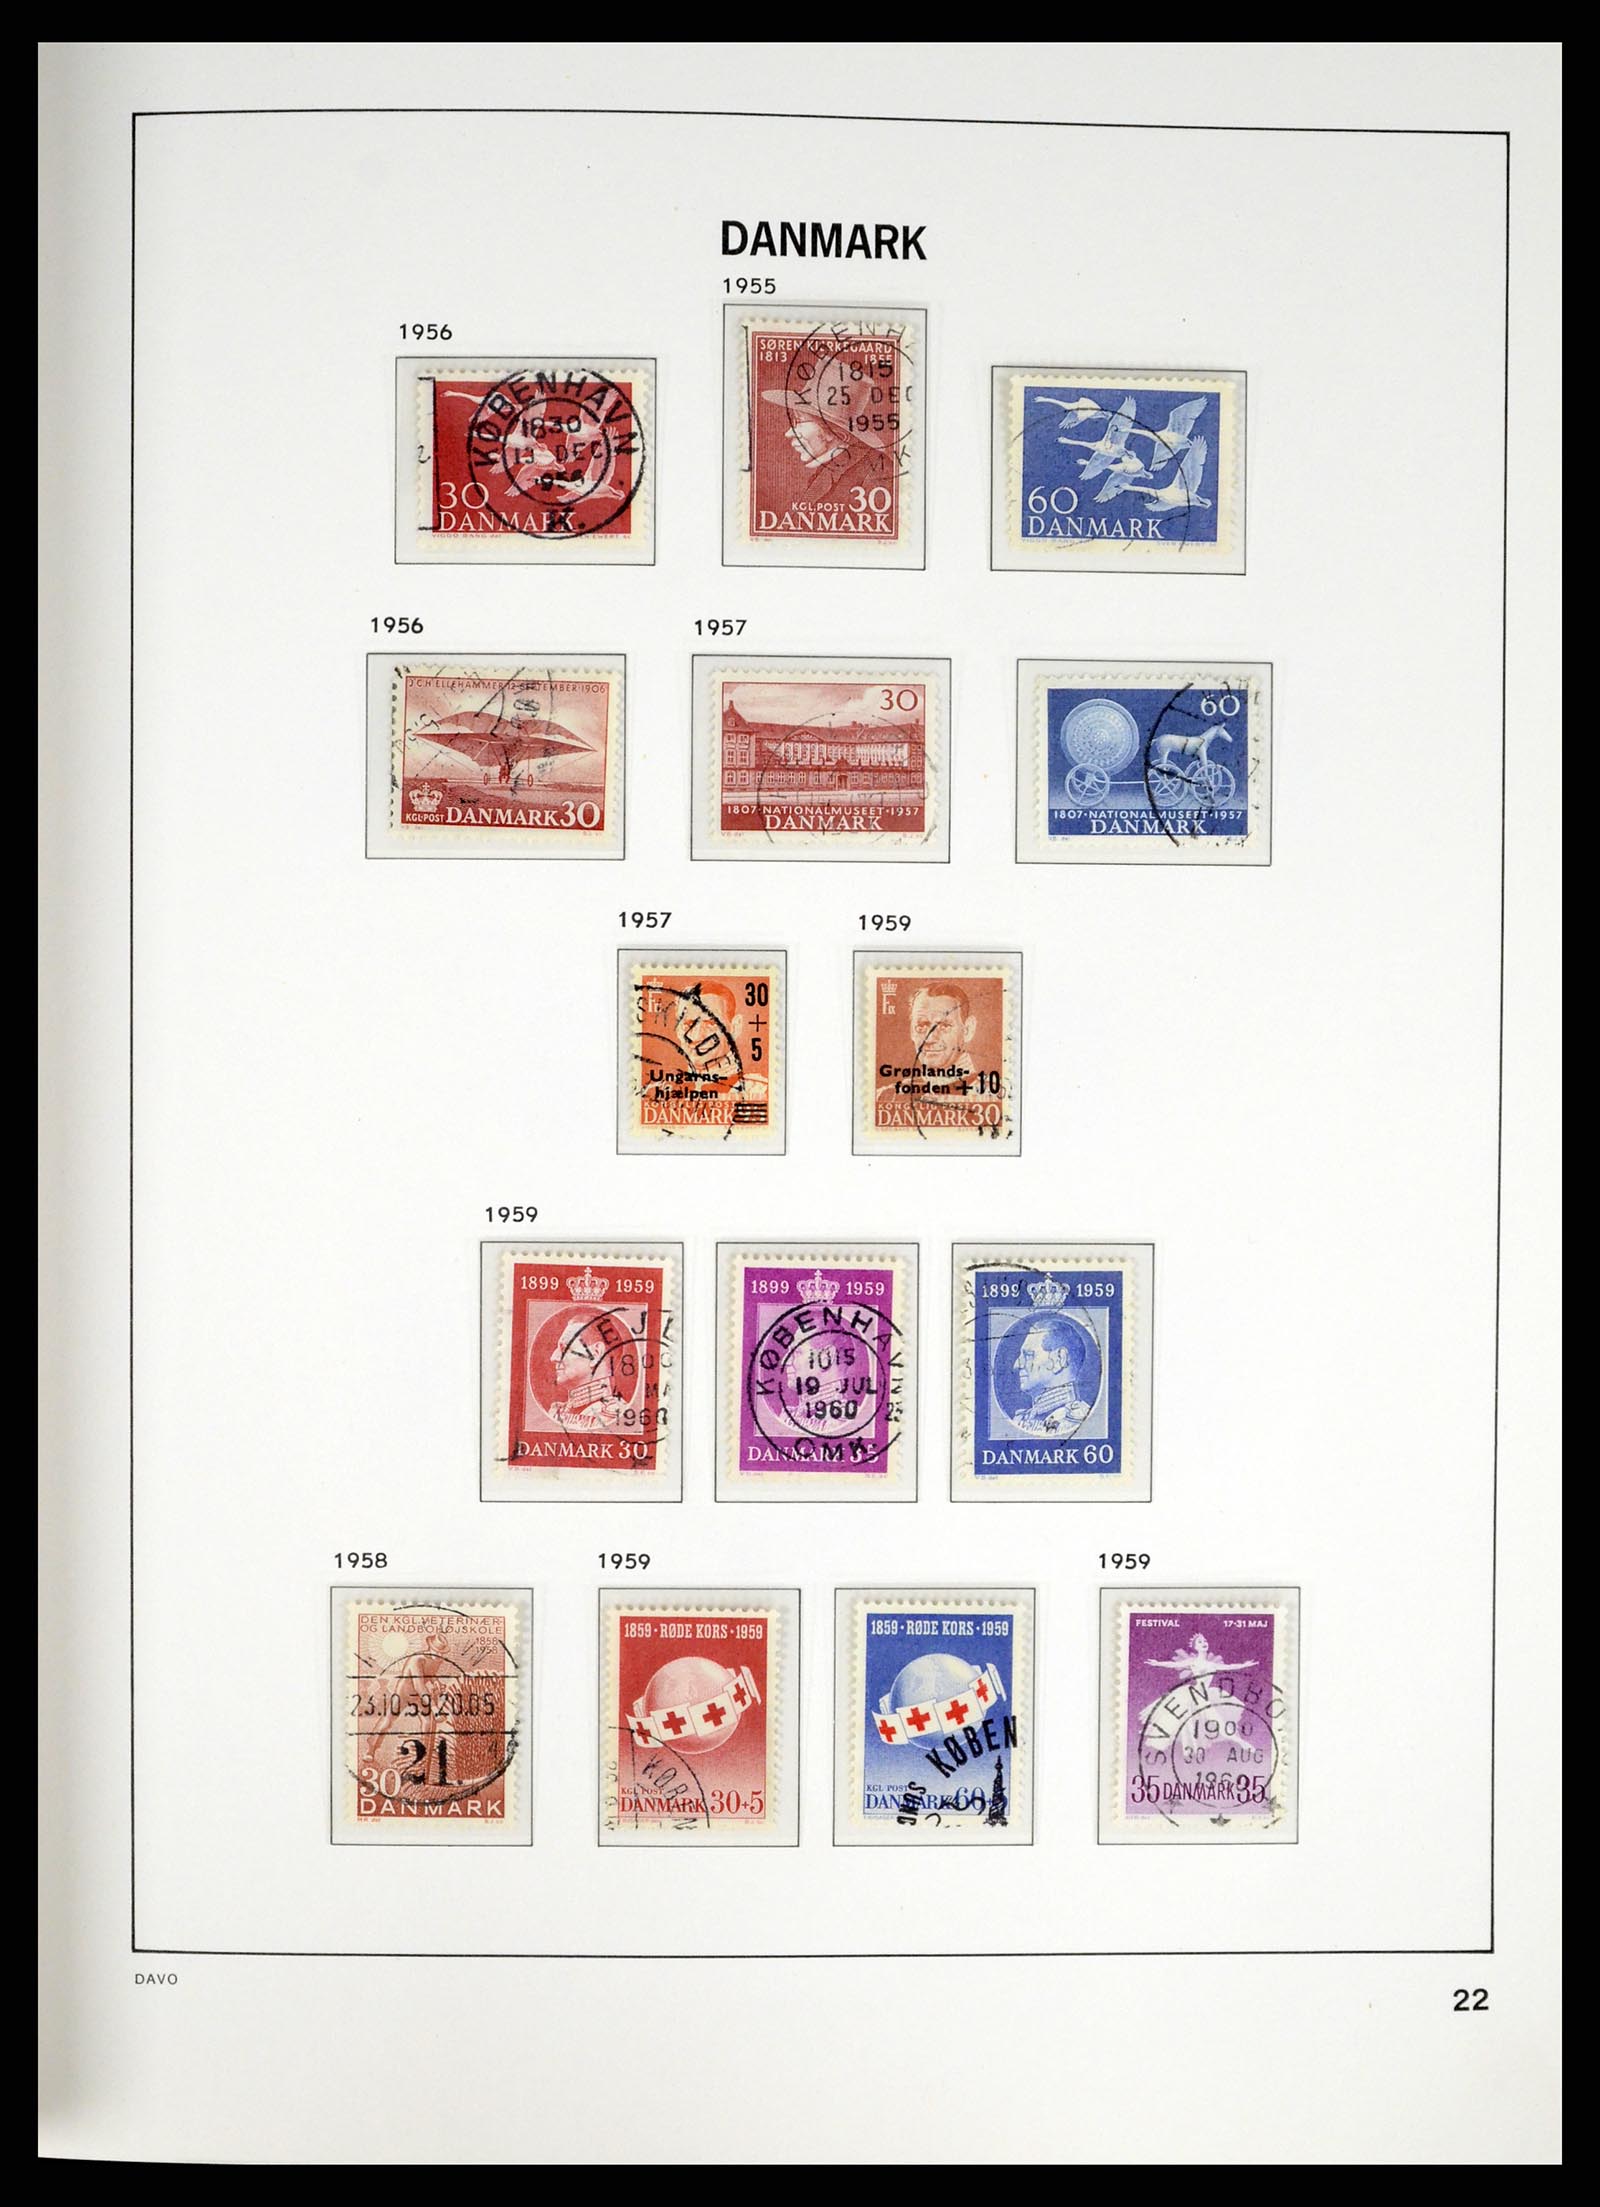 37383 022 - Stamp collection 37383 Denmark 1851-1969.